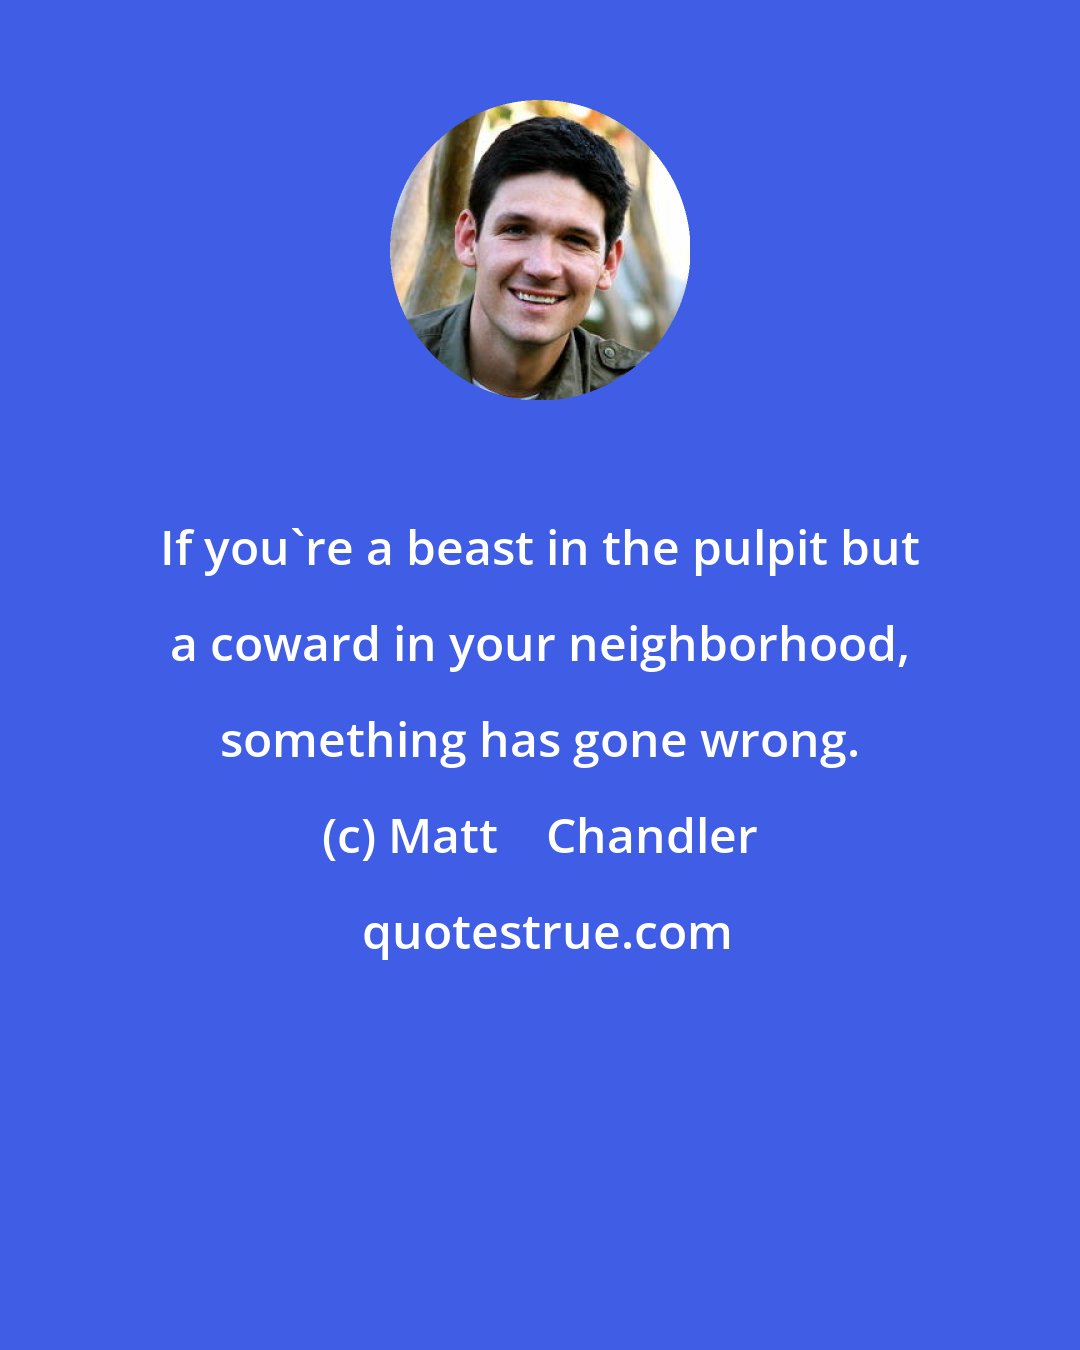 Matt    Chandler: If you're a beast in the pulpit but a coward in your neighborhood, something has gone wrong.